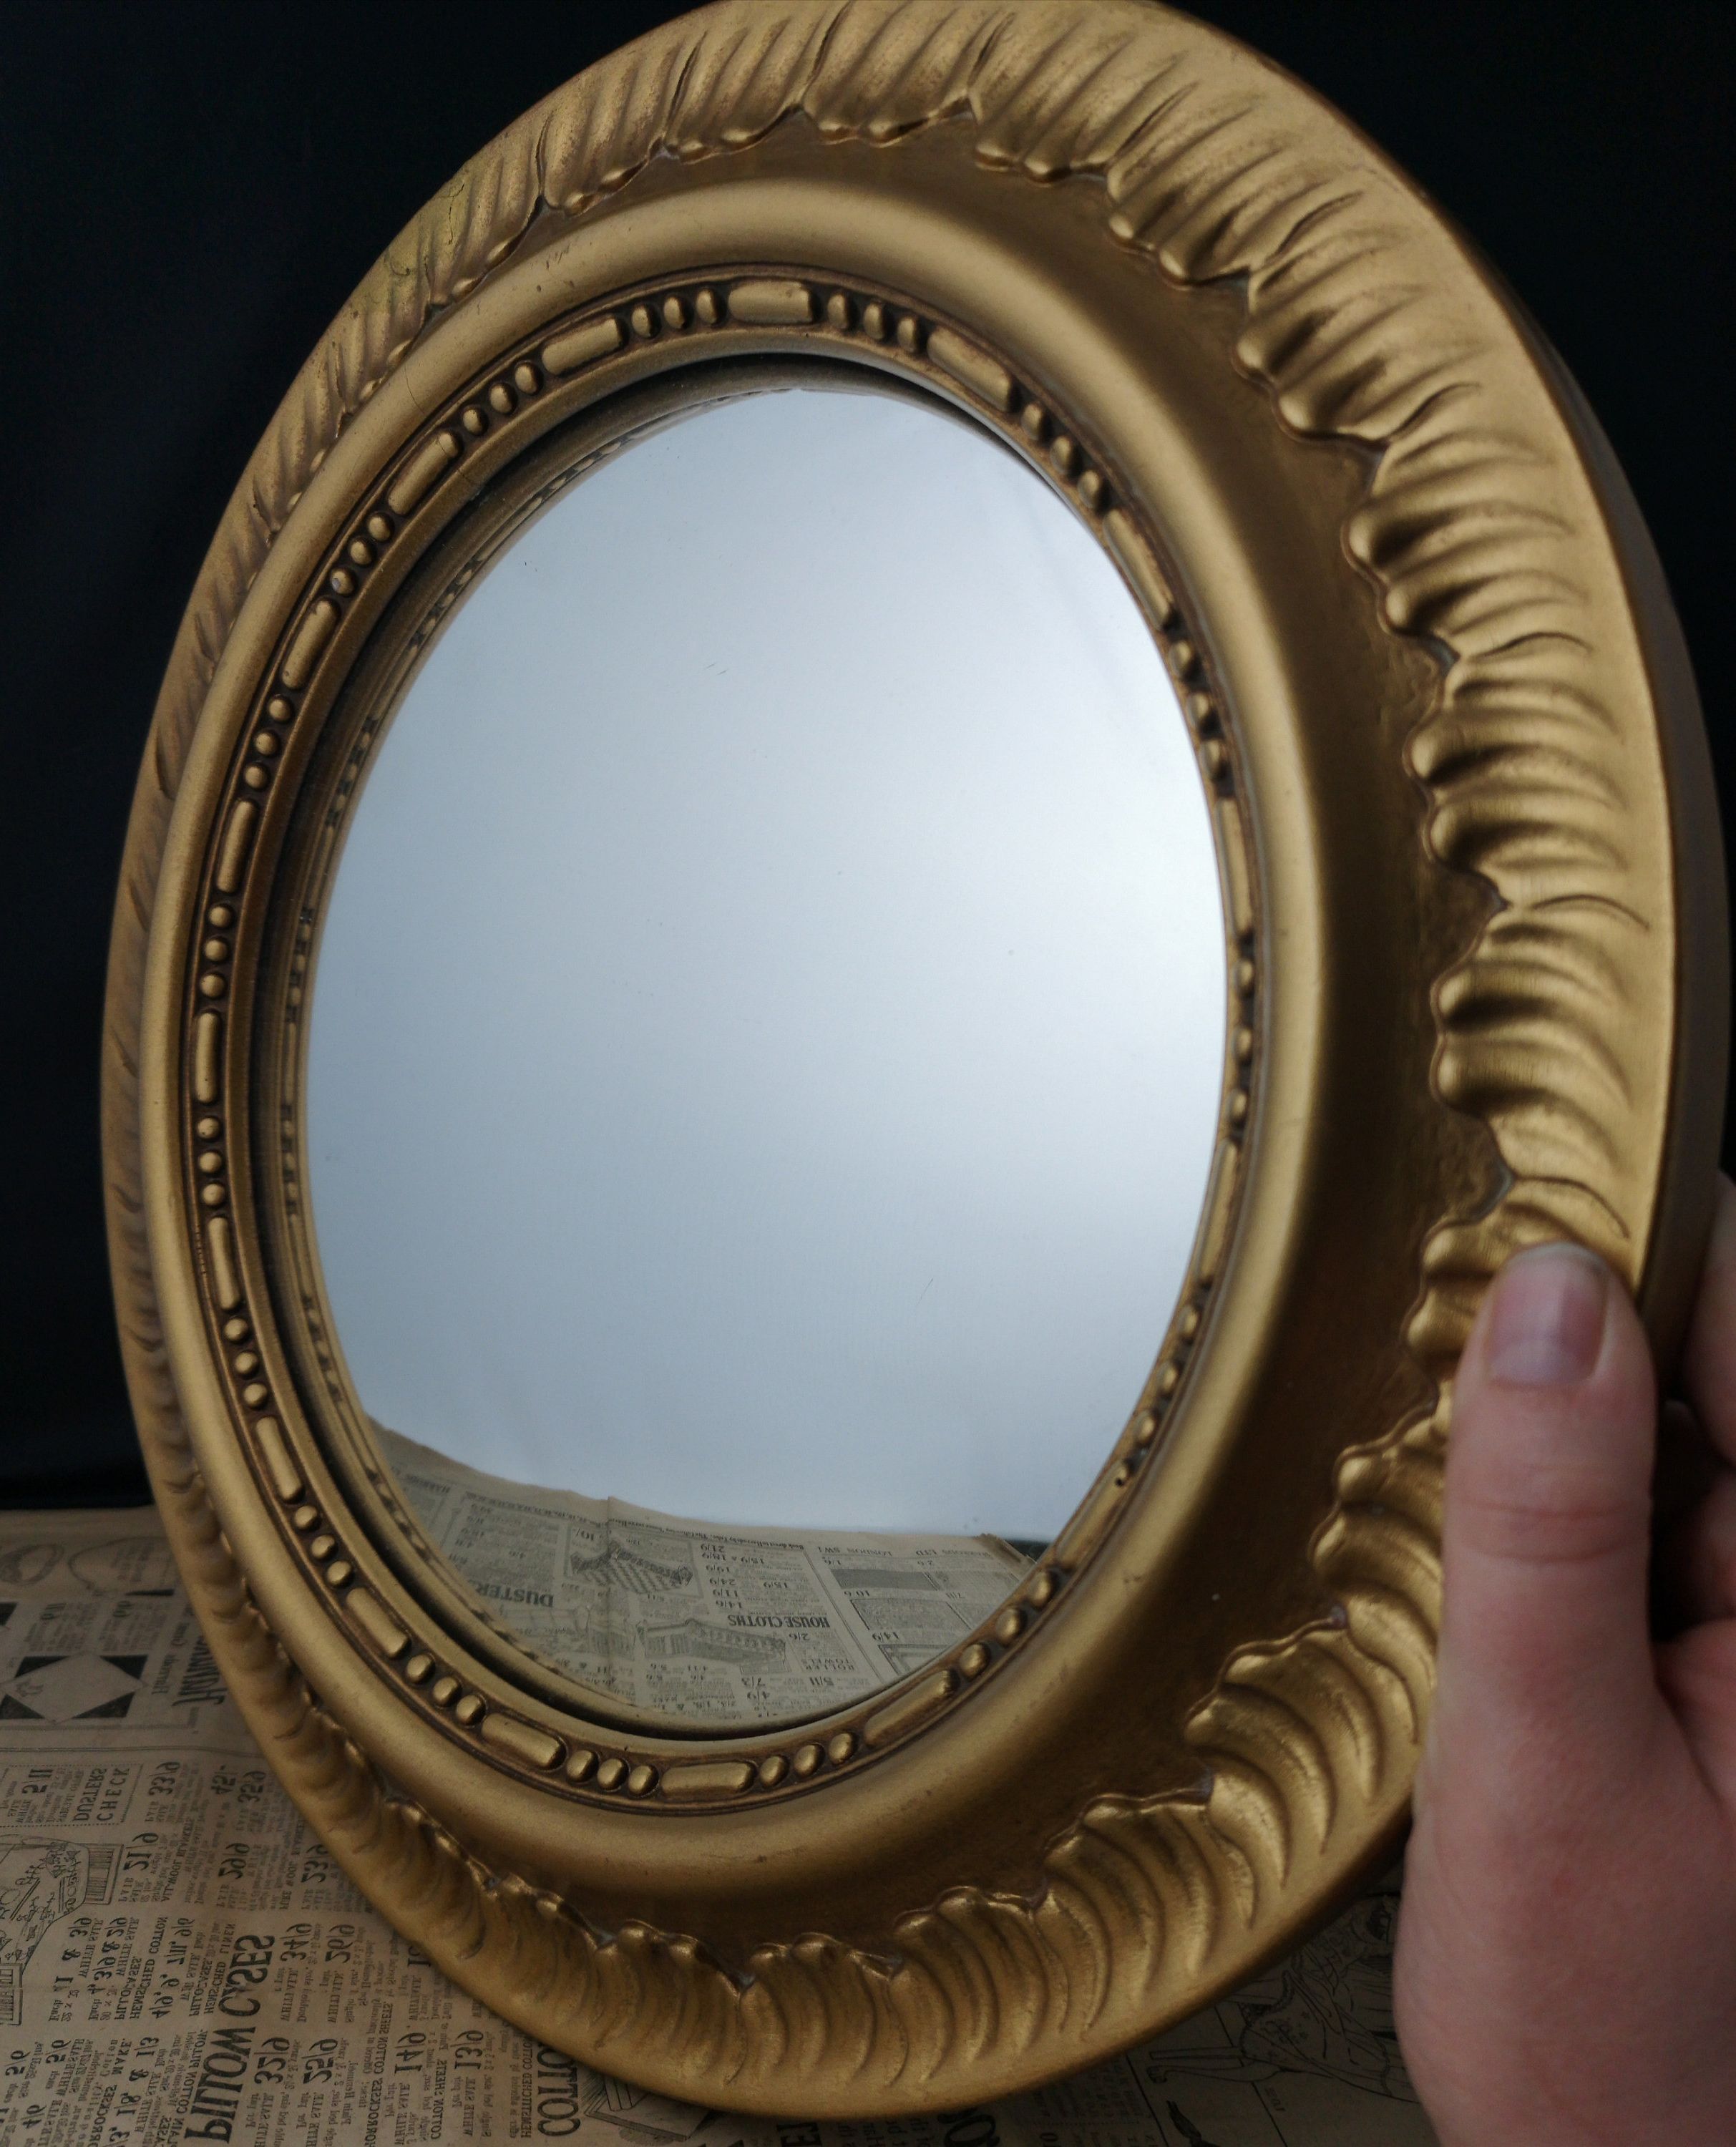 Vintage 30's Gilt Framed Sunburst Wall Mirror, Art Deco Concave Mirror Regarding Current Concave Wall Mirrors (View 10 of 20)